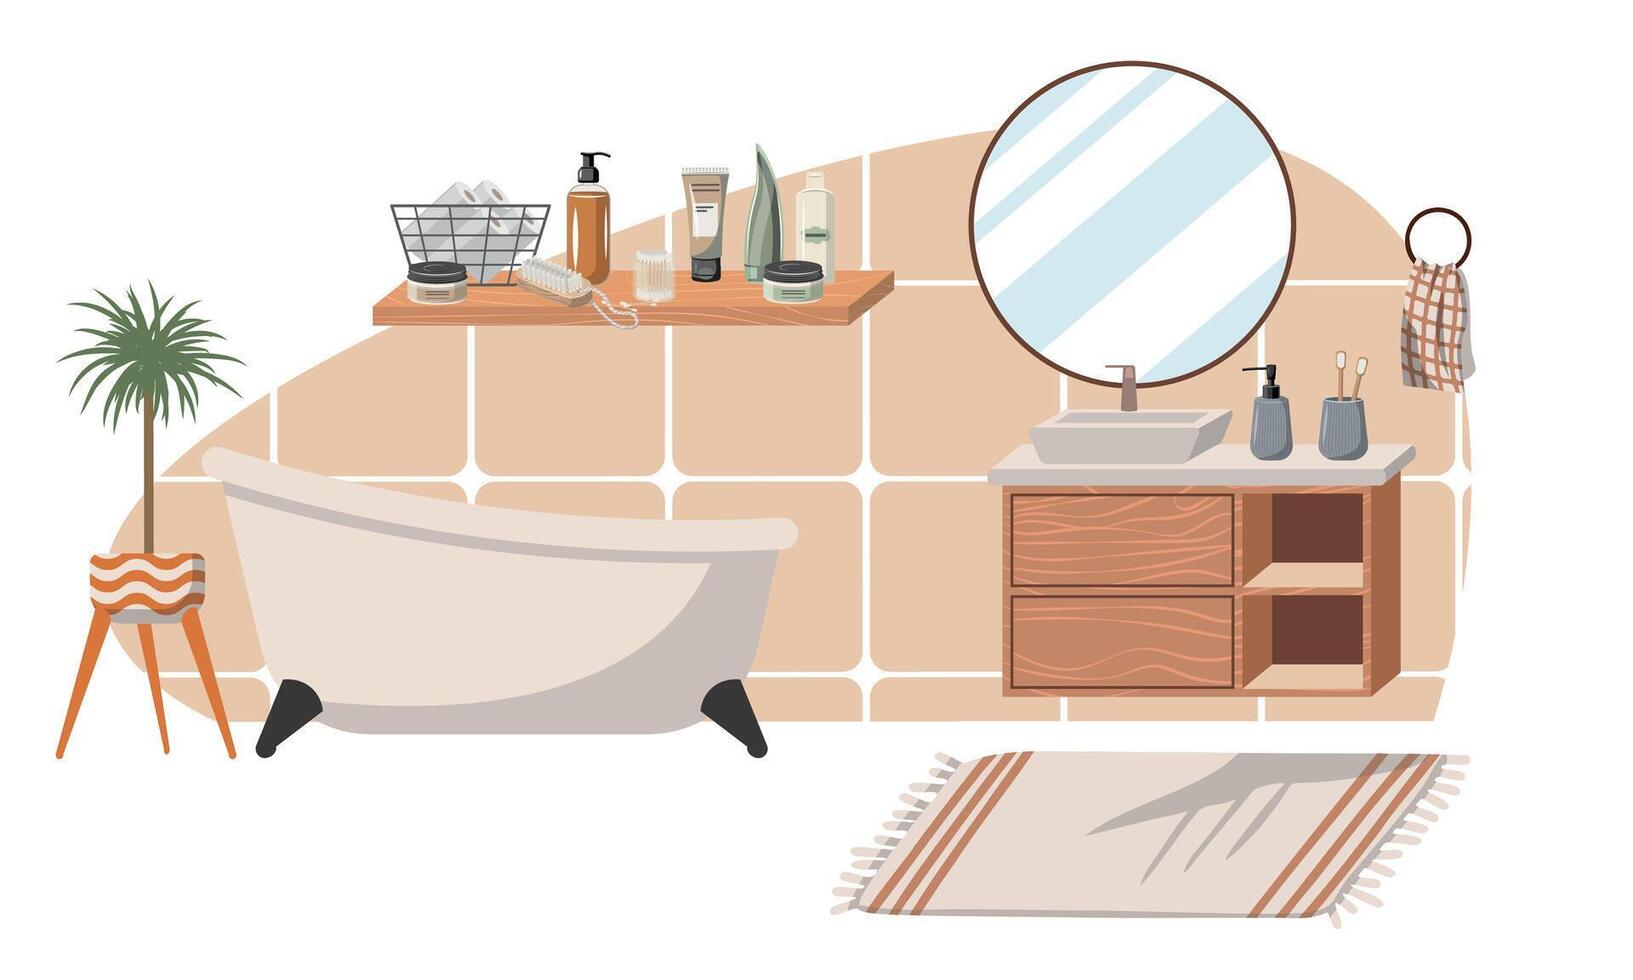 cozy bathroom interiors. Bathrooms and dressing rooms with washbasins, sinks, mirrors, cabinets and plants. Flat vector illustration on white background